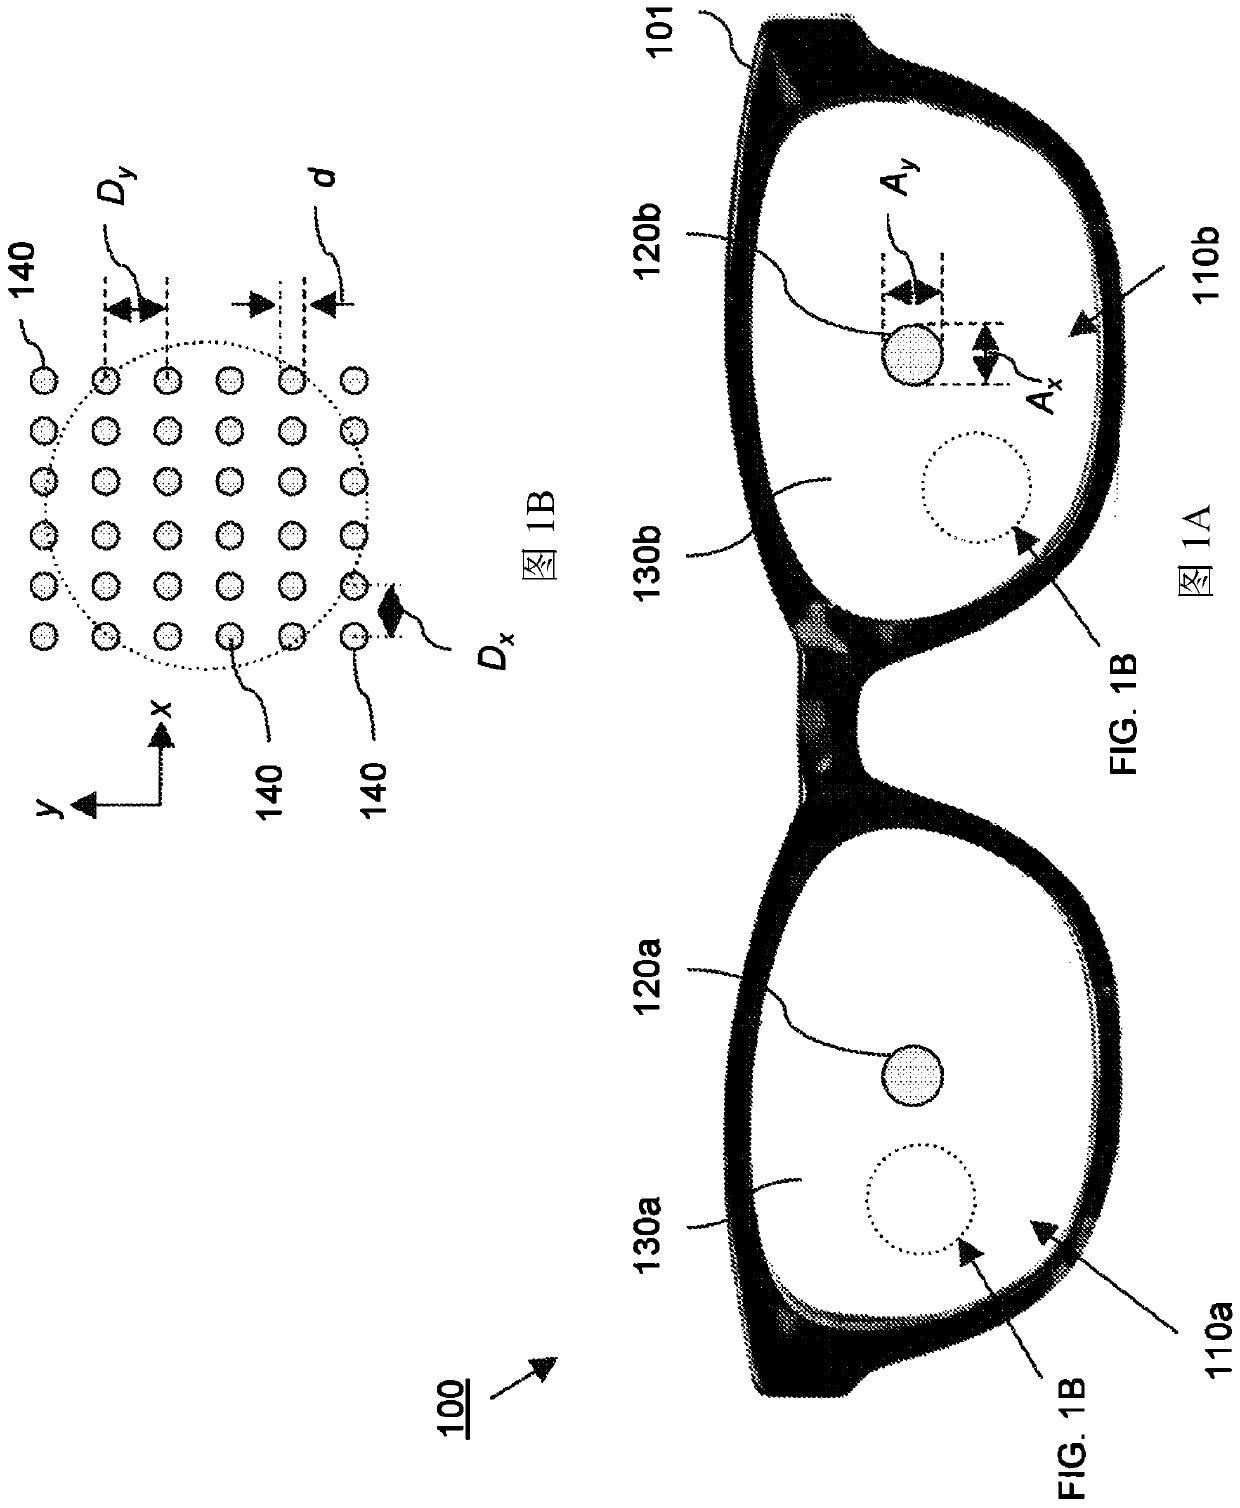 Ophthalmic lenses for treating myopia